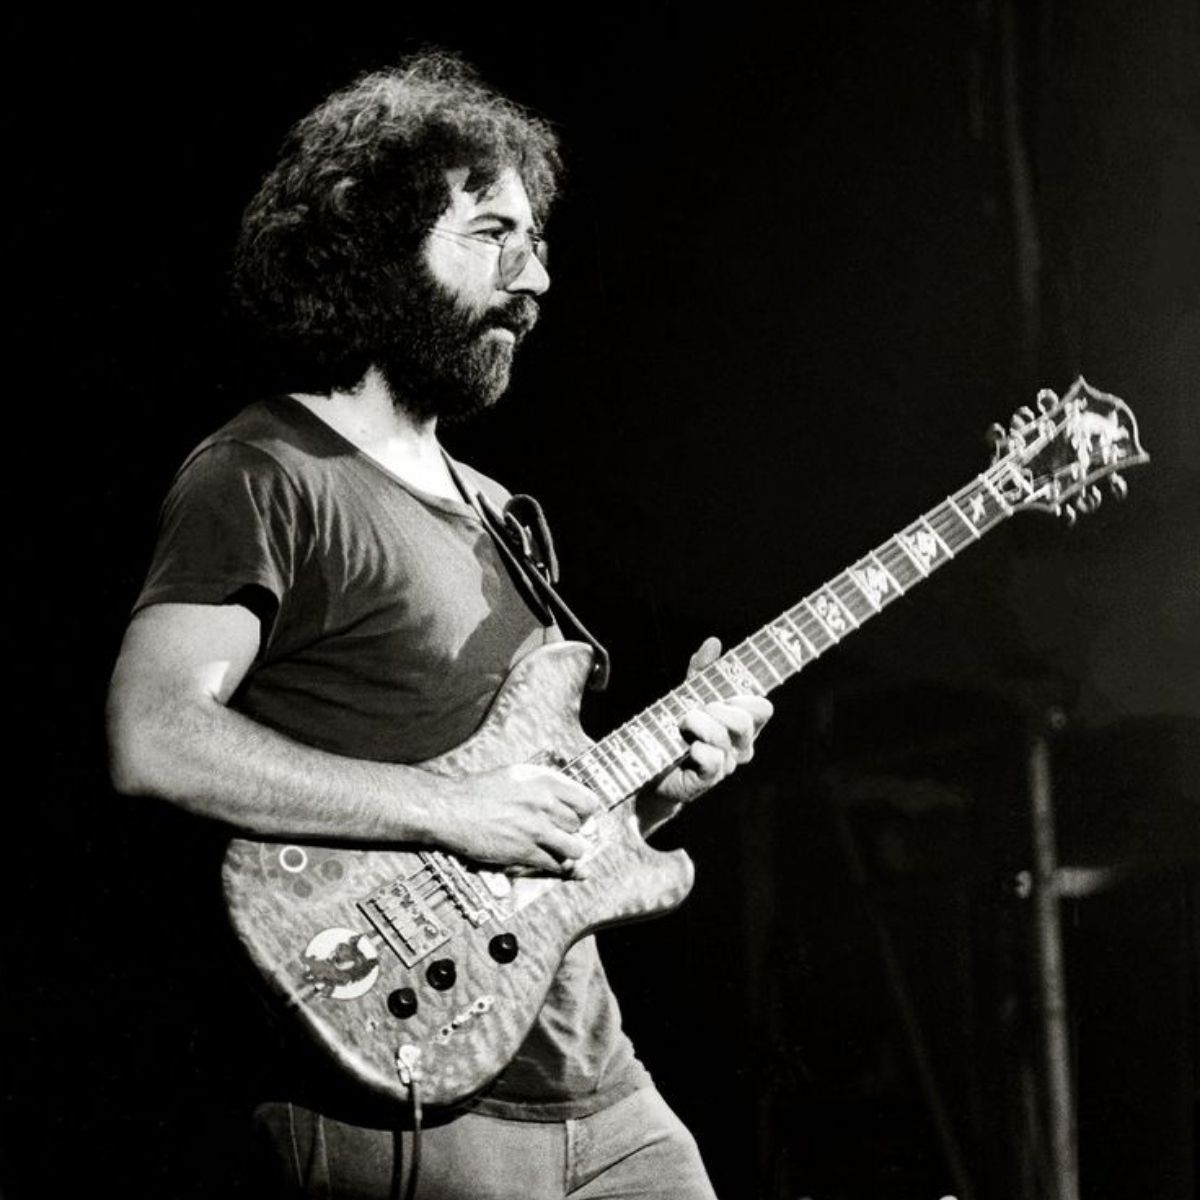 Jerry Garcia at one of his performances